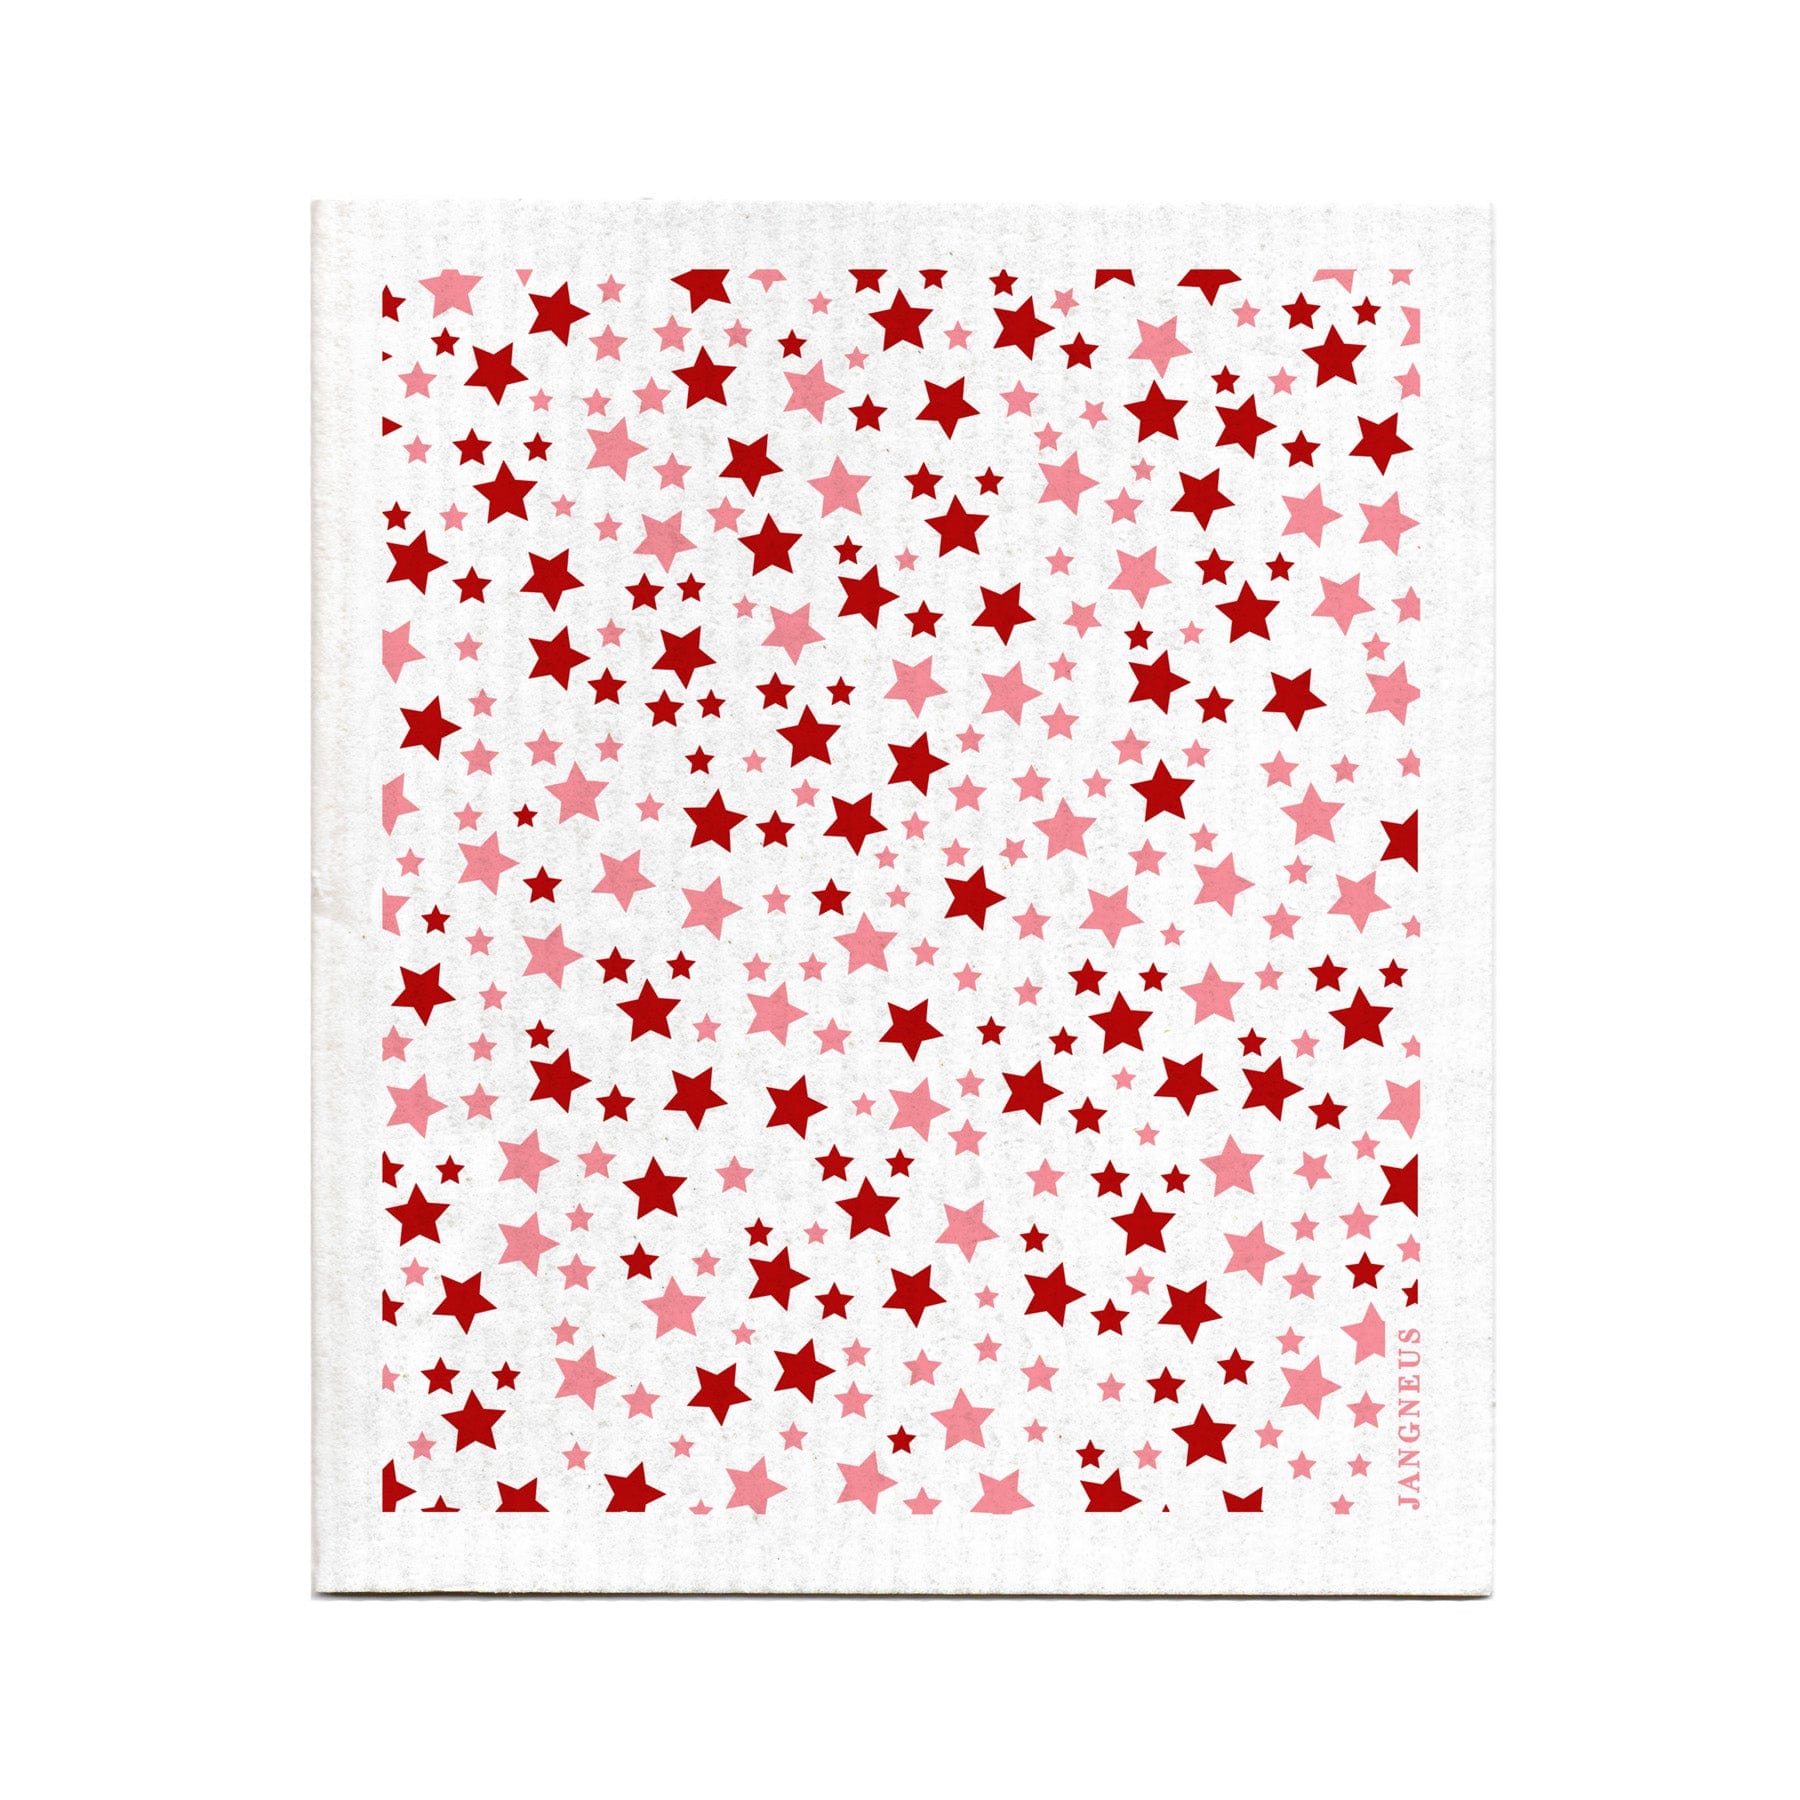 White canvas with a gradient of red stars, starry texture design, abstract star pattern, artistic decoration concept